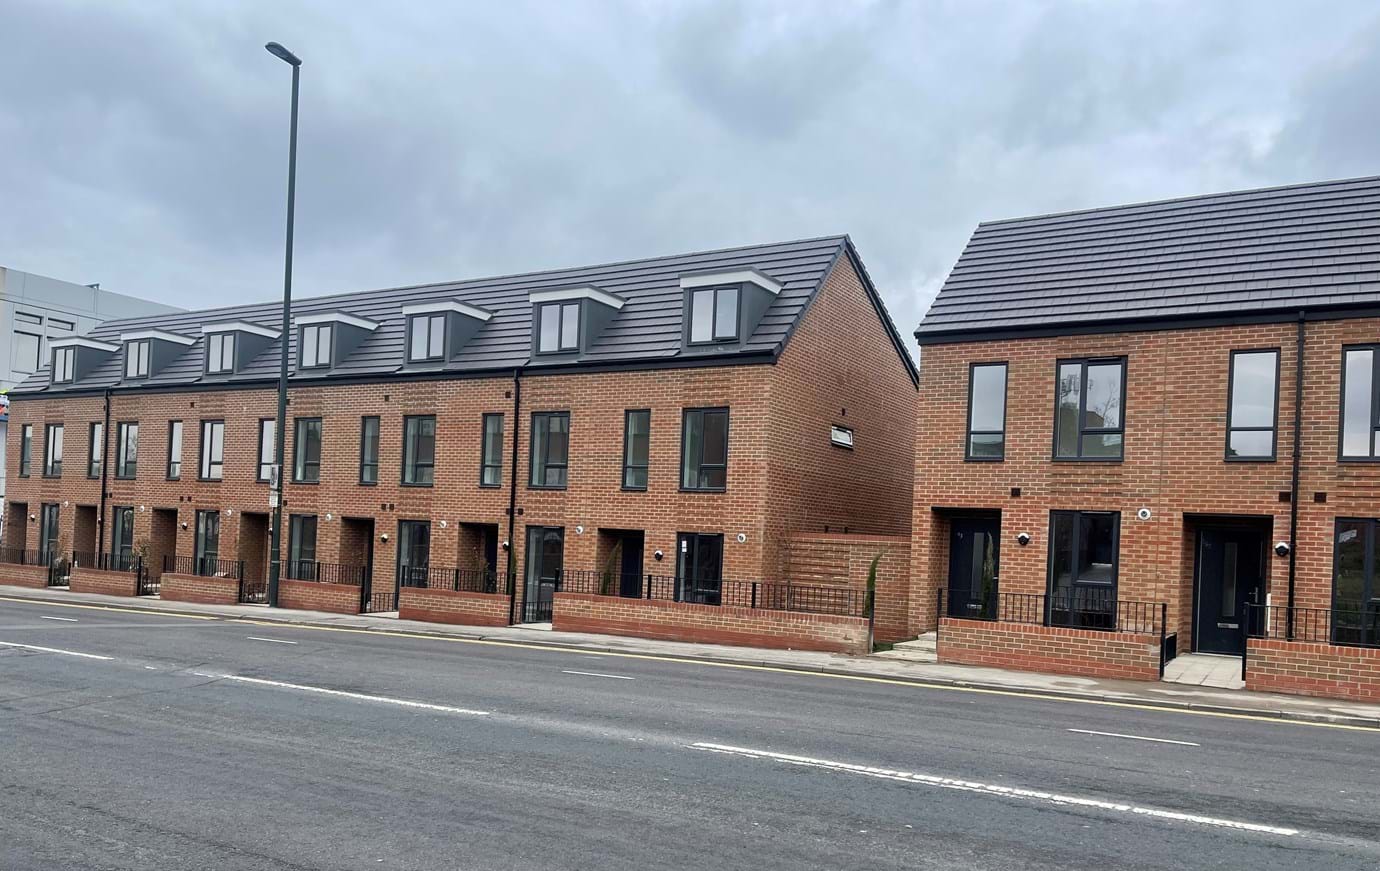 14 New Affordable Homes In Failsworth Completed 1